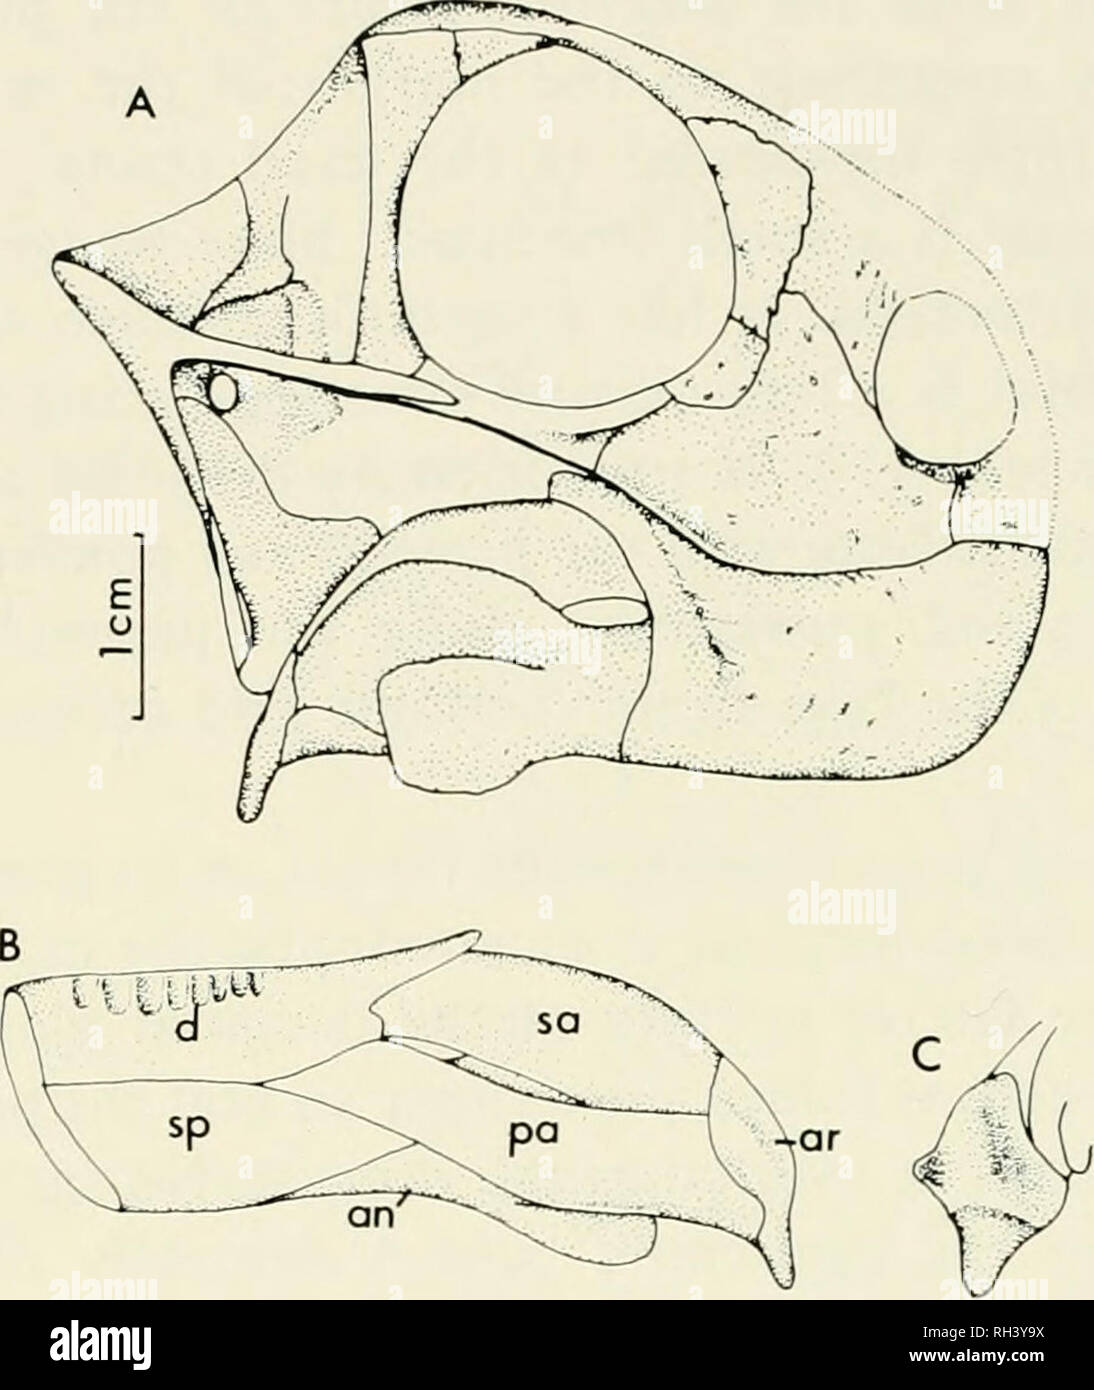 . Breviora. BREVIORA No. 465. Figure 3. Galeops whaitsi. A) reconstruction of skull and lower jaw; B) reconstruction of lower jaw, medial view; C) reconstruction of articular, dorsoposte- rior view. Abbreviations: see Figure 2. parietals extend lateral to this ridge as a ventrally facing shelf that would have provided an area for muscle attachment. This shelf forms a portion of the lateral edge of the temporal fenestra. Anteriorly, a cup-shaped depression is present just anterior and lateral to the area of attachment of the braincase. The quadratojugal is a small splintlike bone resting on the Stock Photo